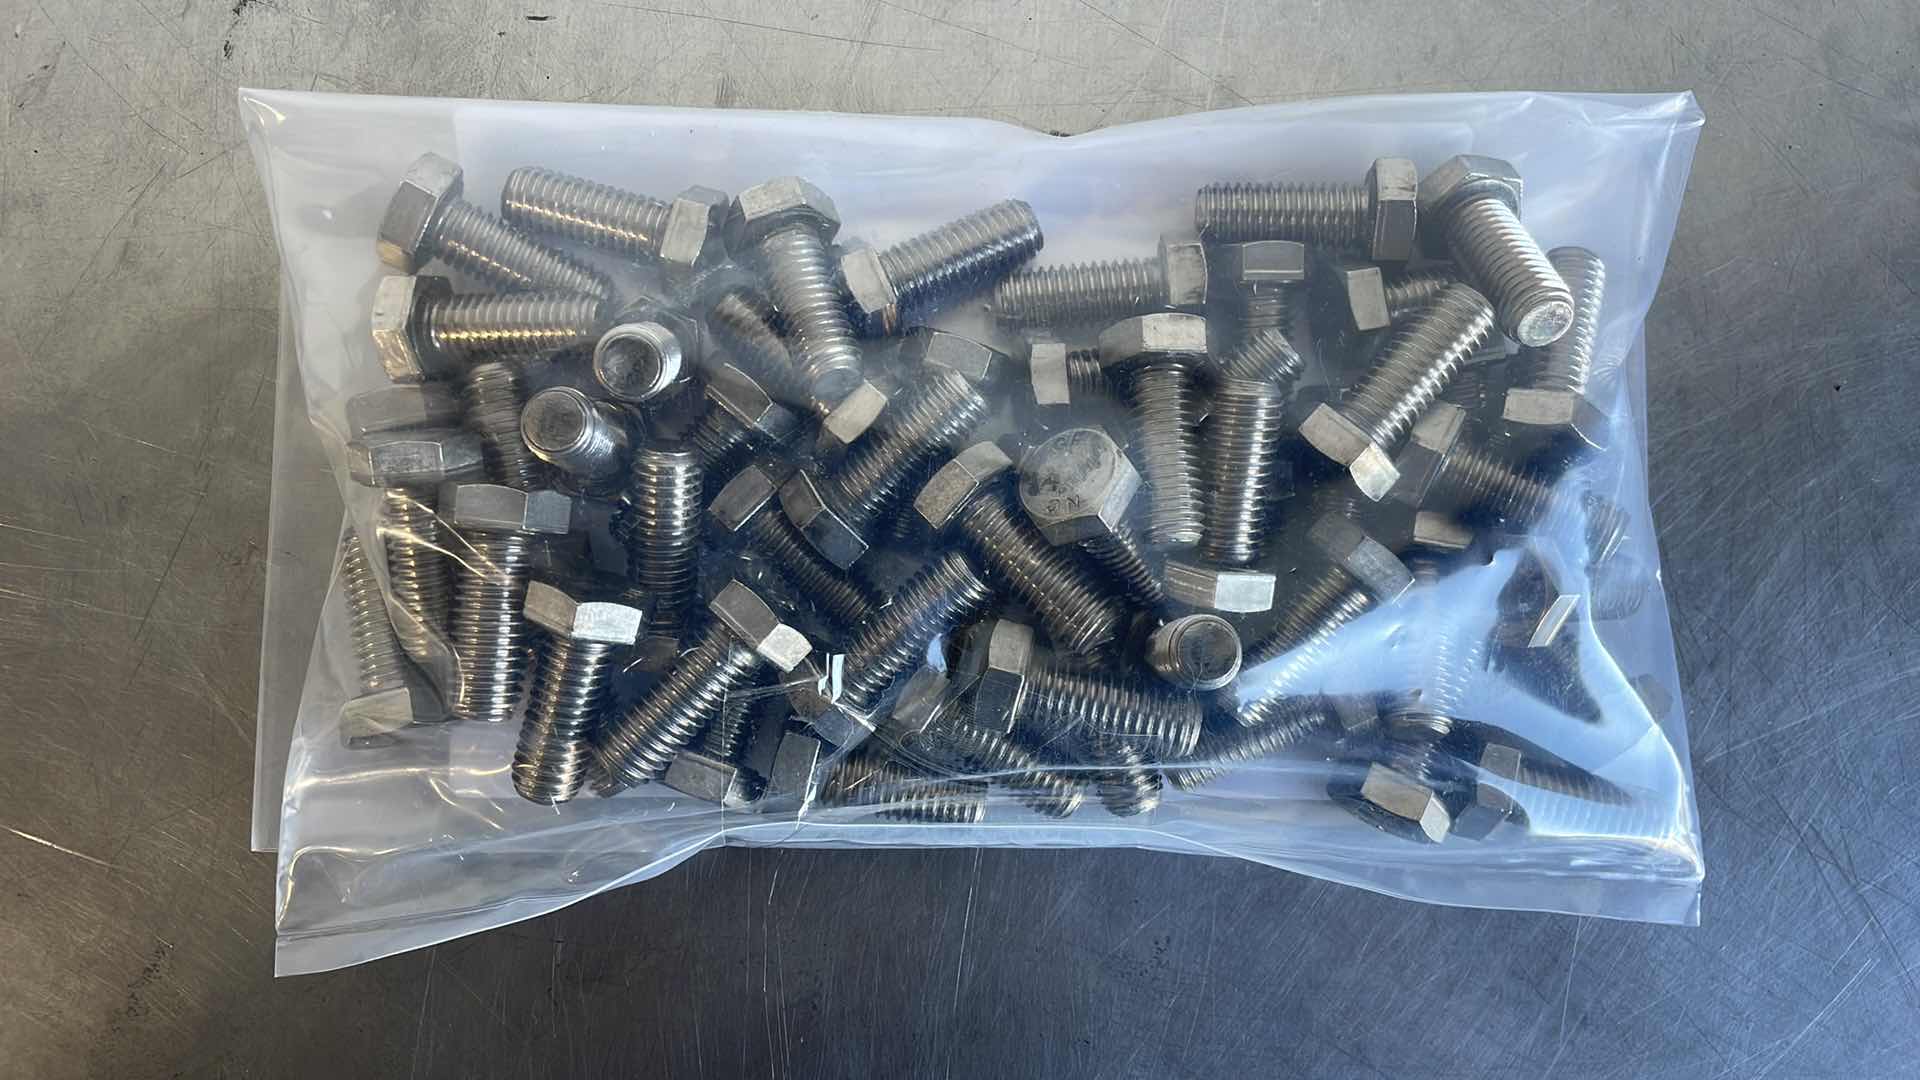 Photo 2 of 1/2-13 x 1-1/4" NICKEL ALLOY BOLTS (50)